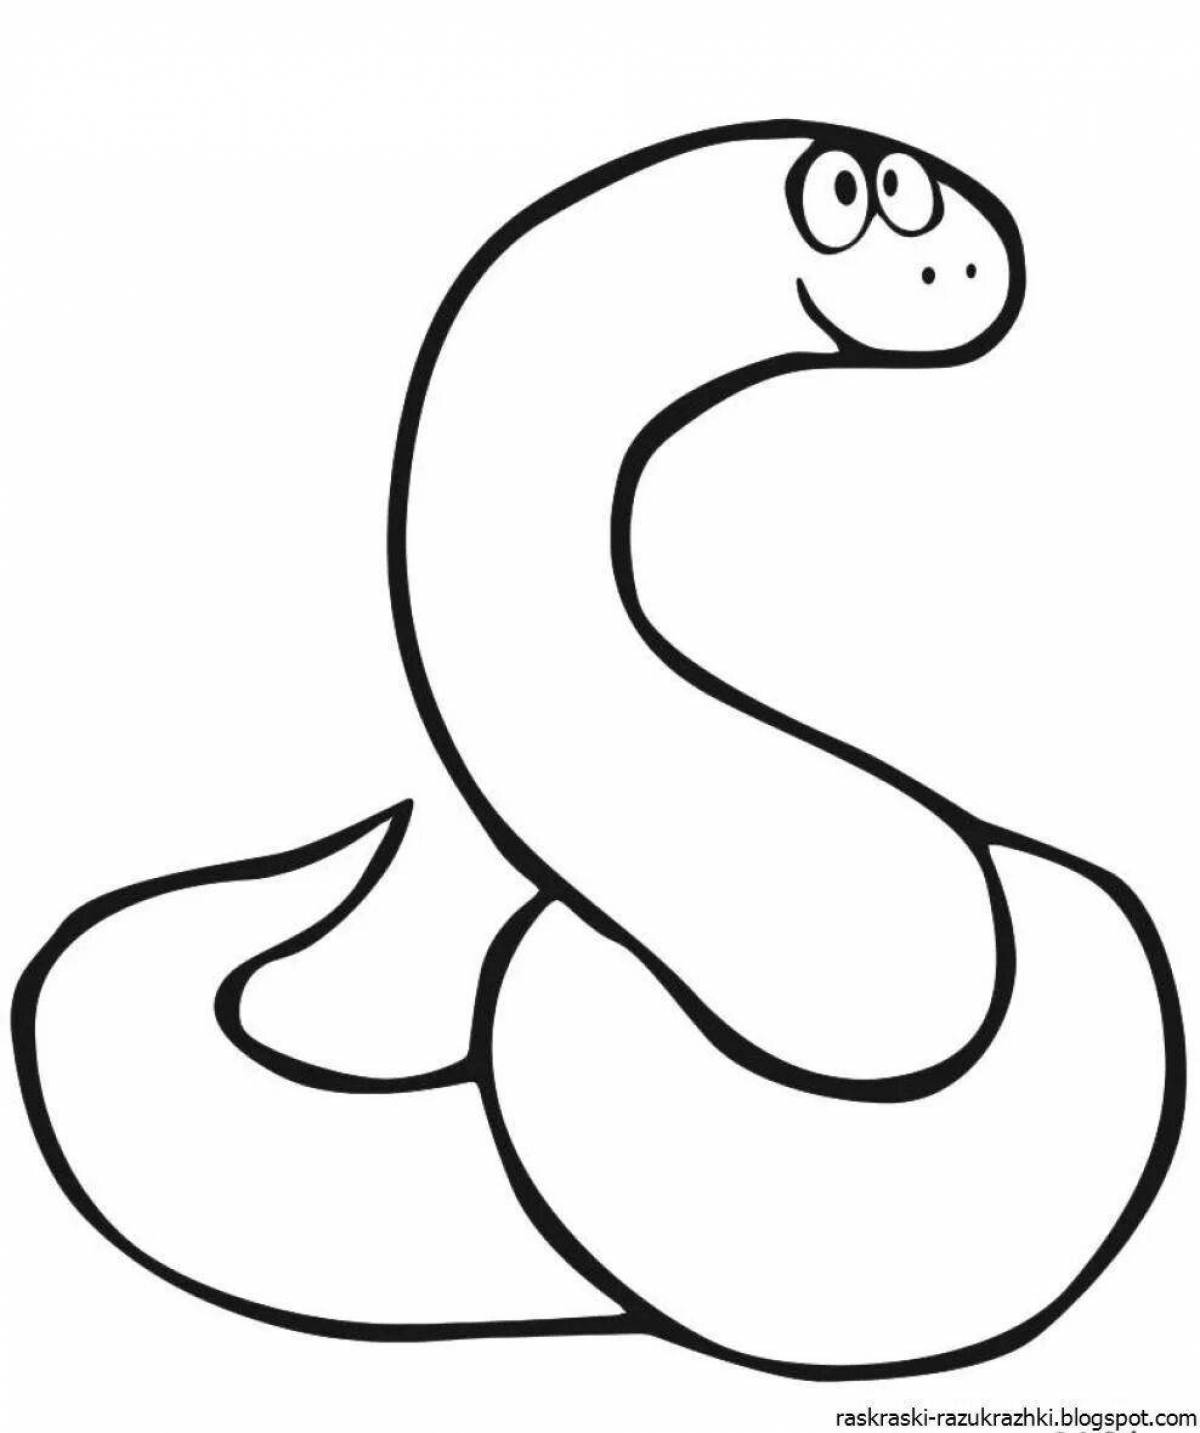 Cute snake coloring book for kids